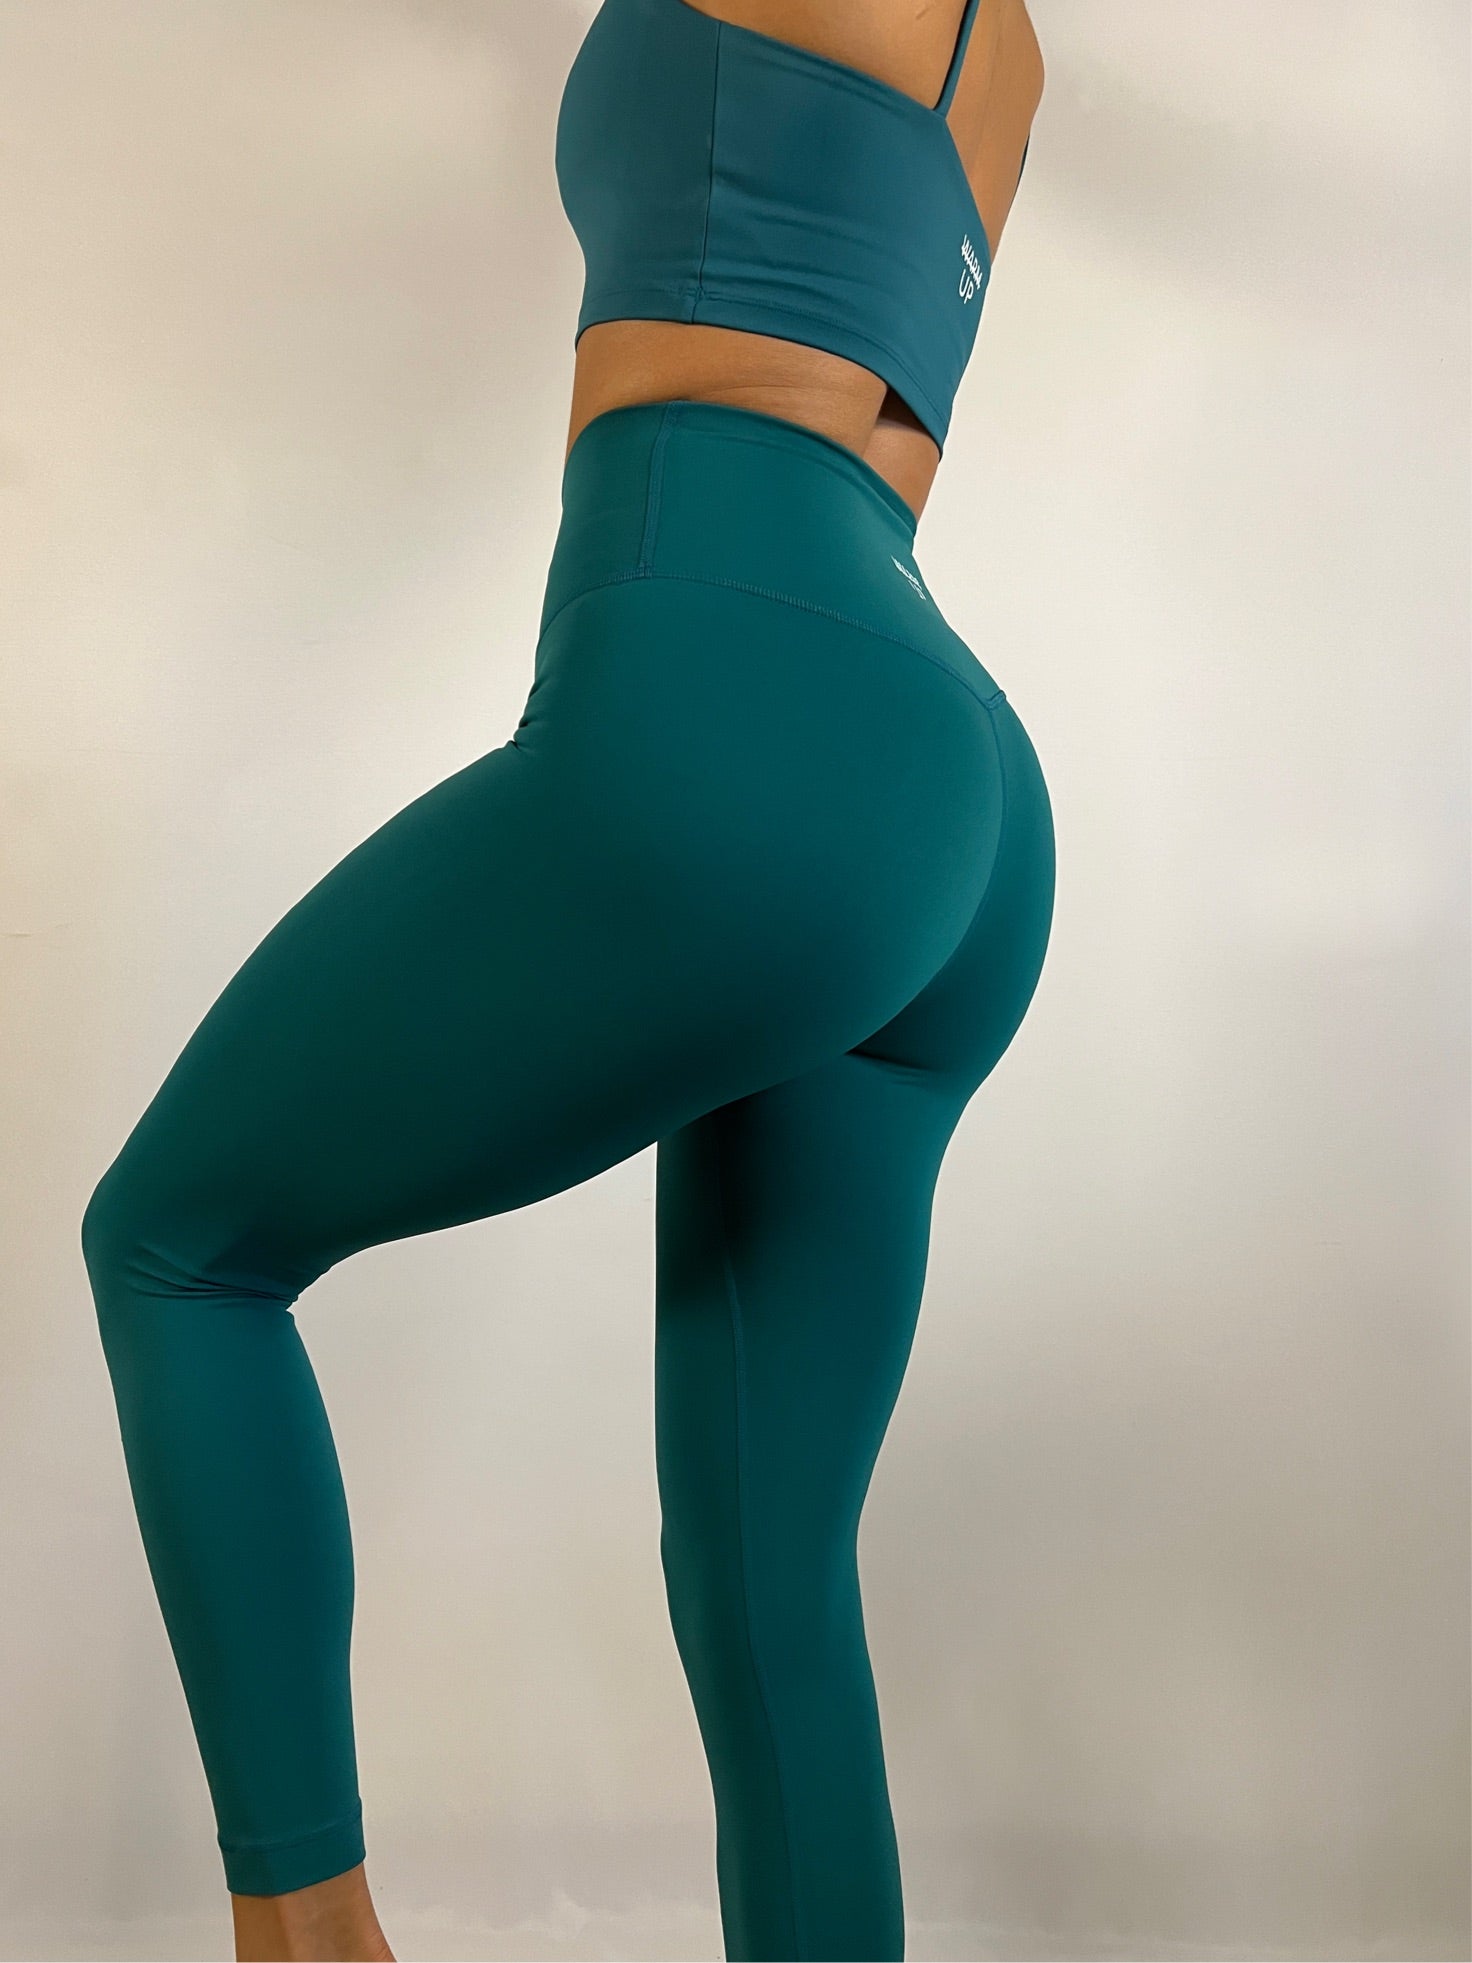 Top more than 132 forest green leggings best